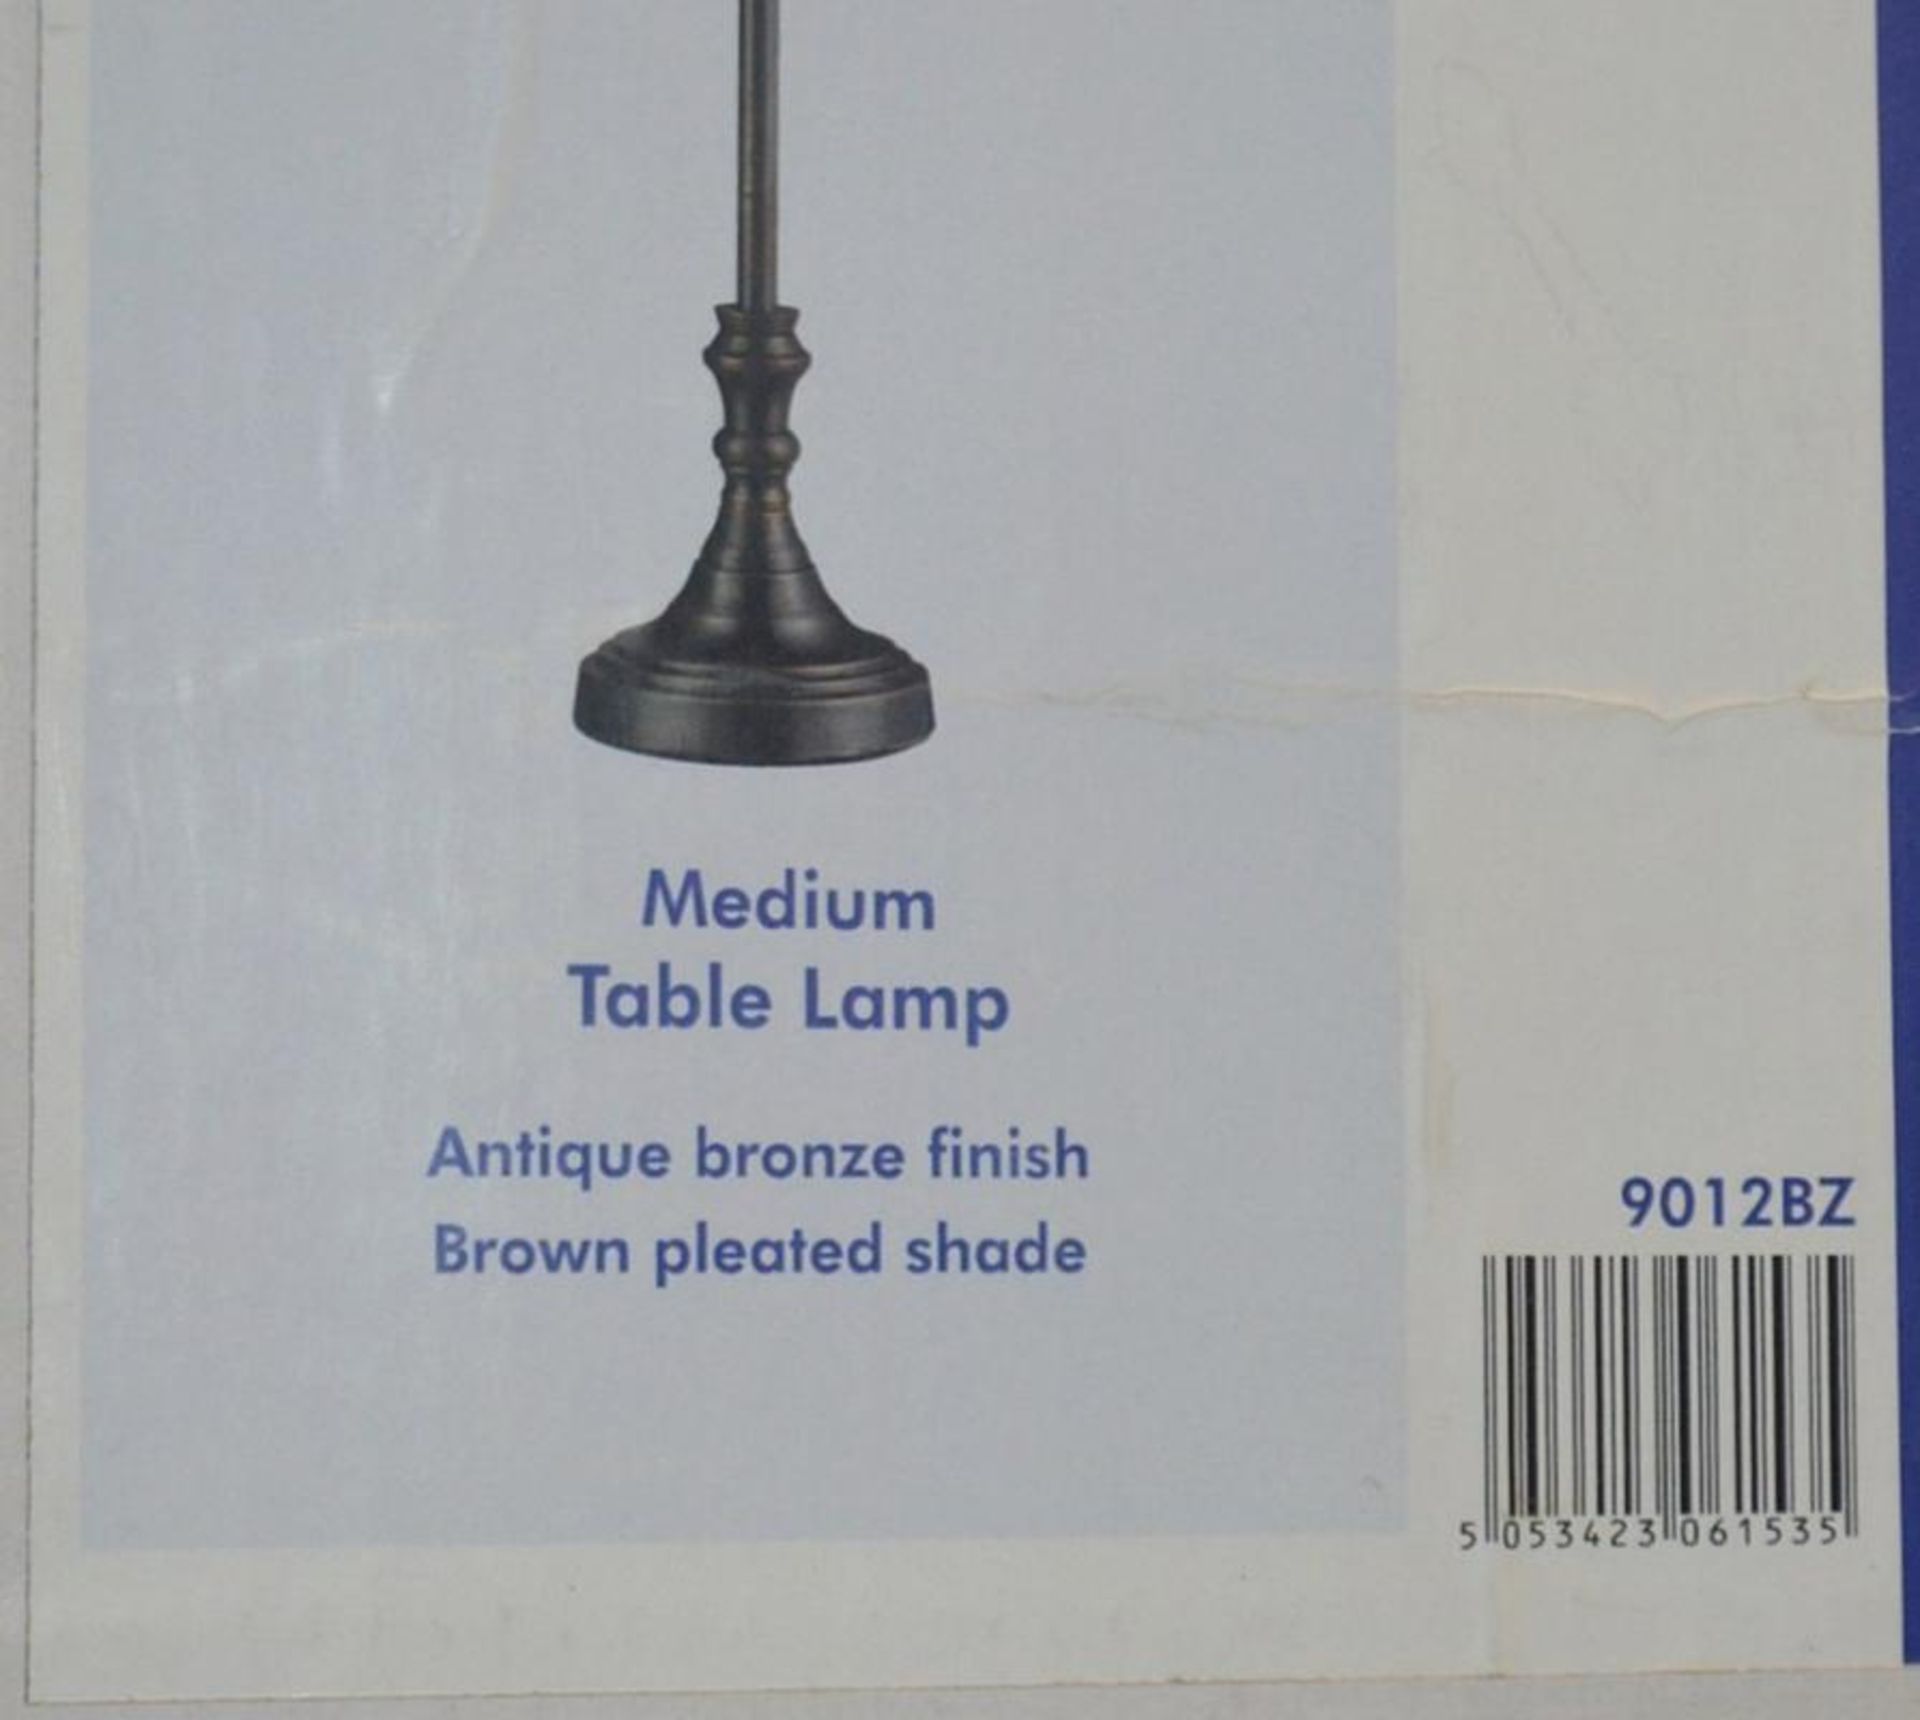 1 x Mantel Medium antique Bronze Decorative Table Lamp, Pleated Brown Shade- Brand New Boxed Stock - - Image 3 of 3